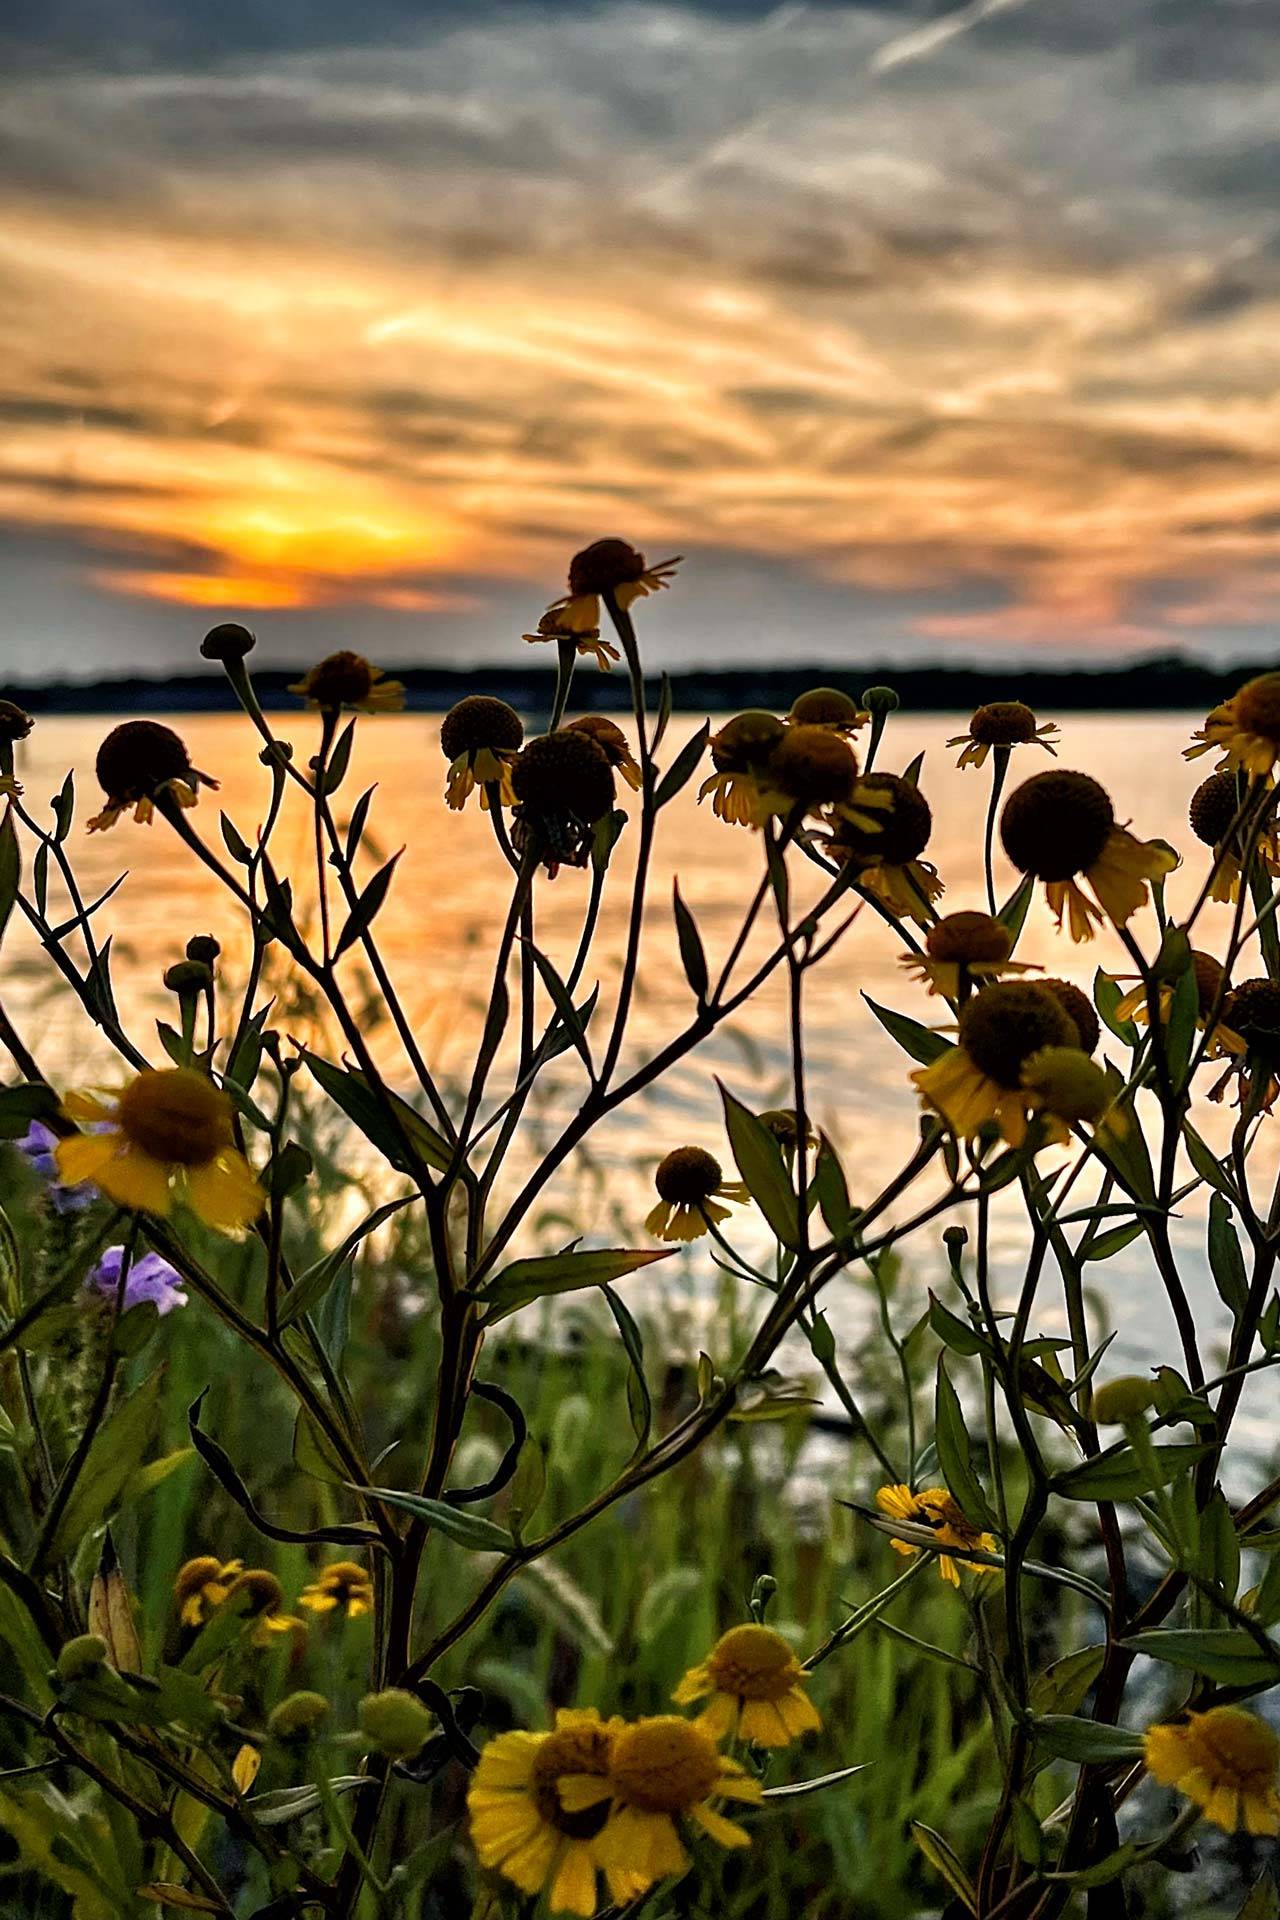 Sunset over water with wildflowers on the banks.